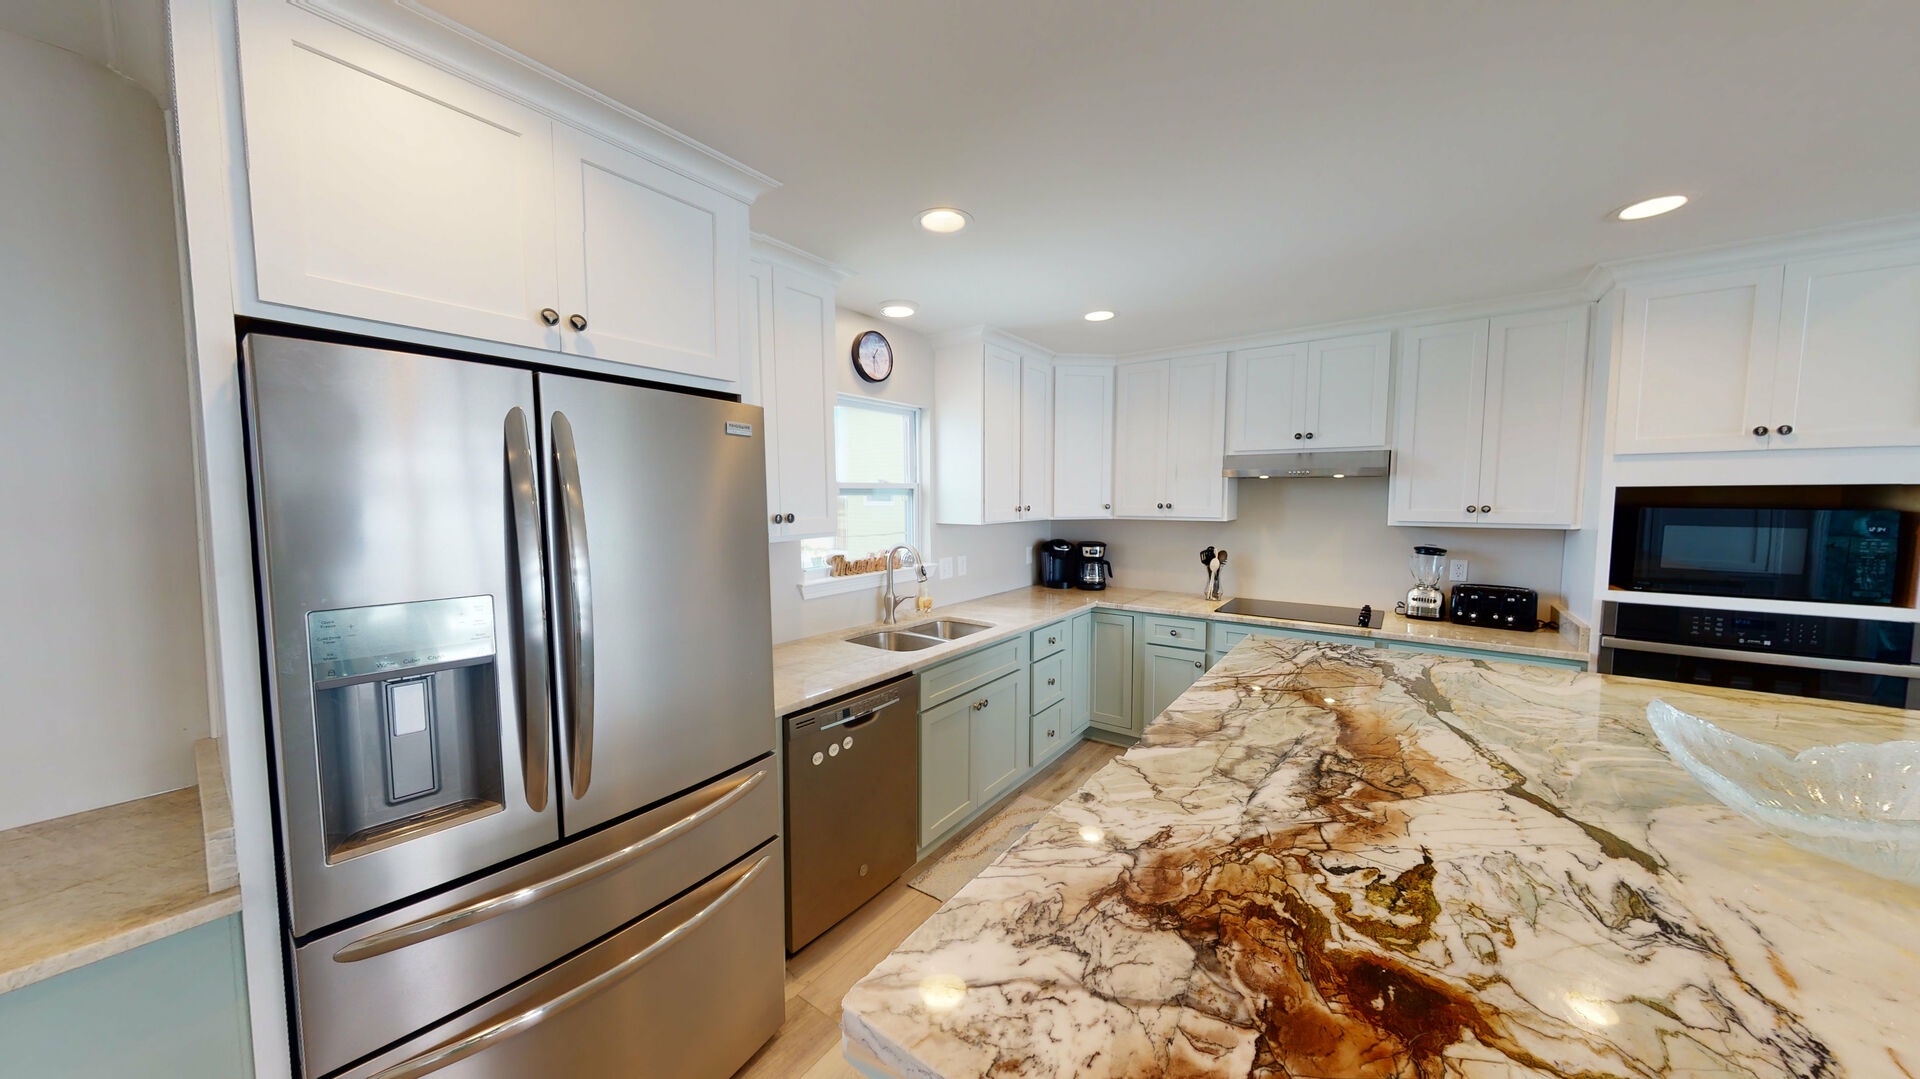 Gorgeous countertops and stainless appliances